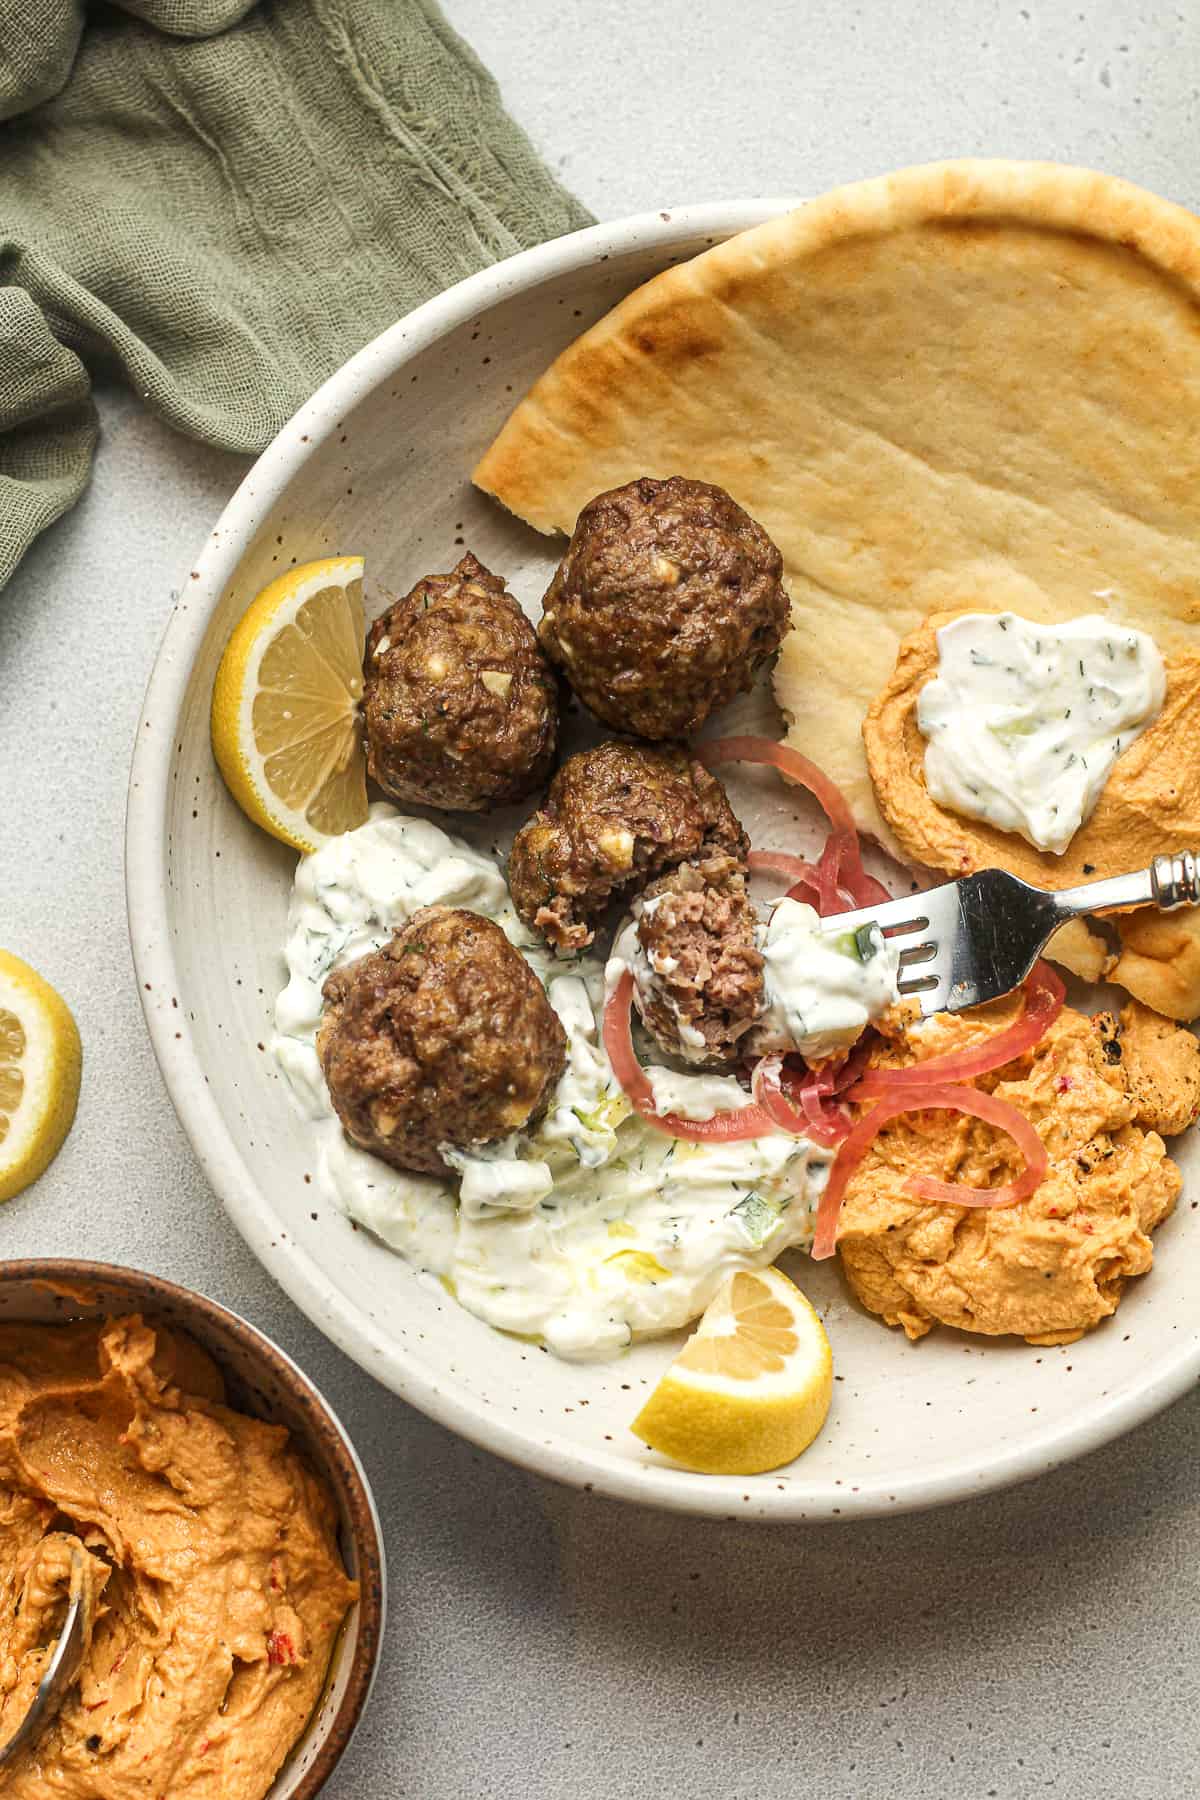 Overhead view of a bowl of Greek meatballs, naan, and sauce.